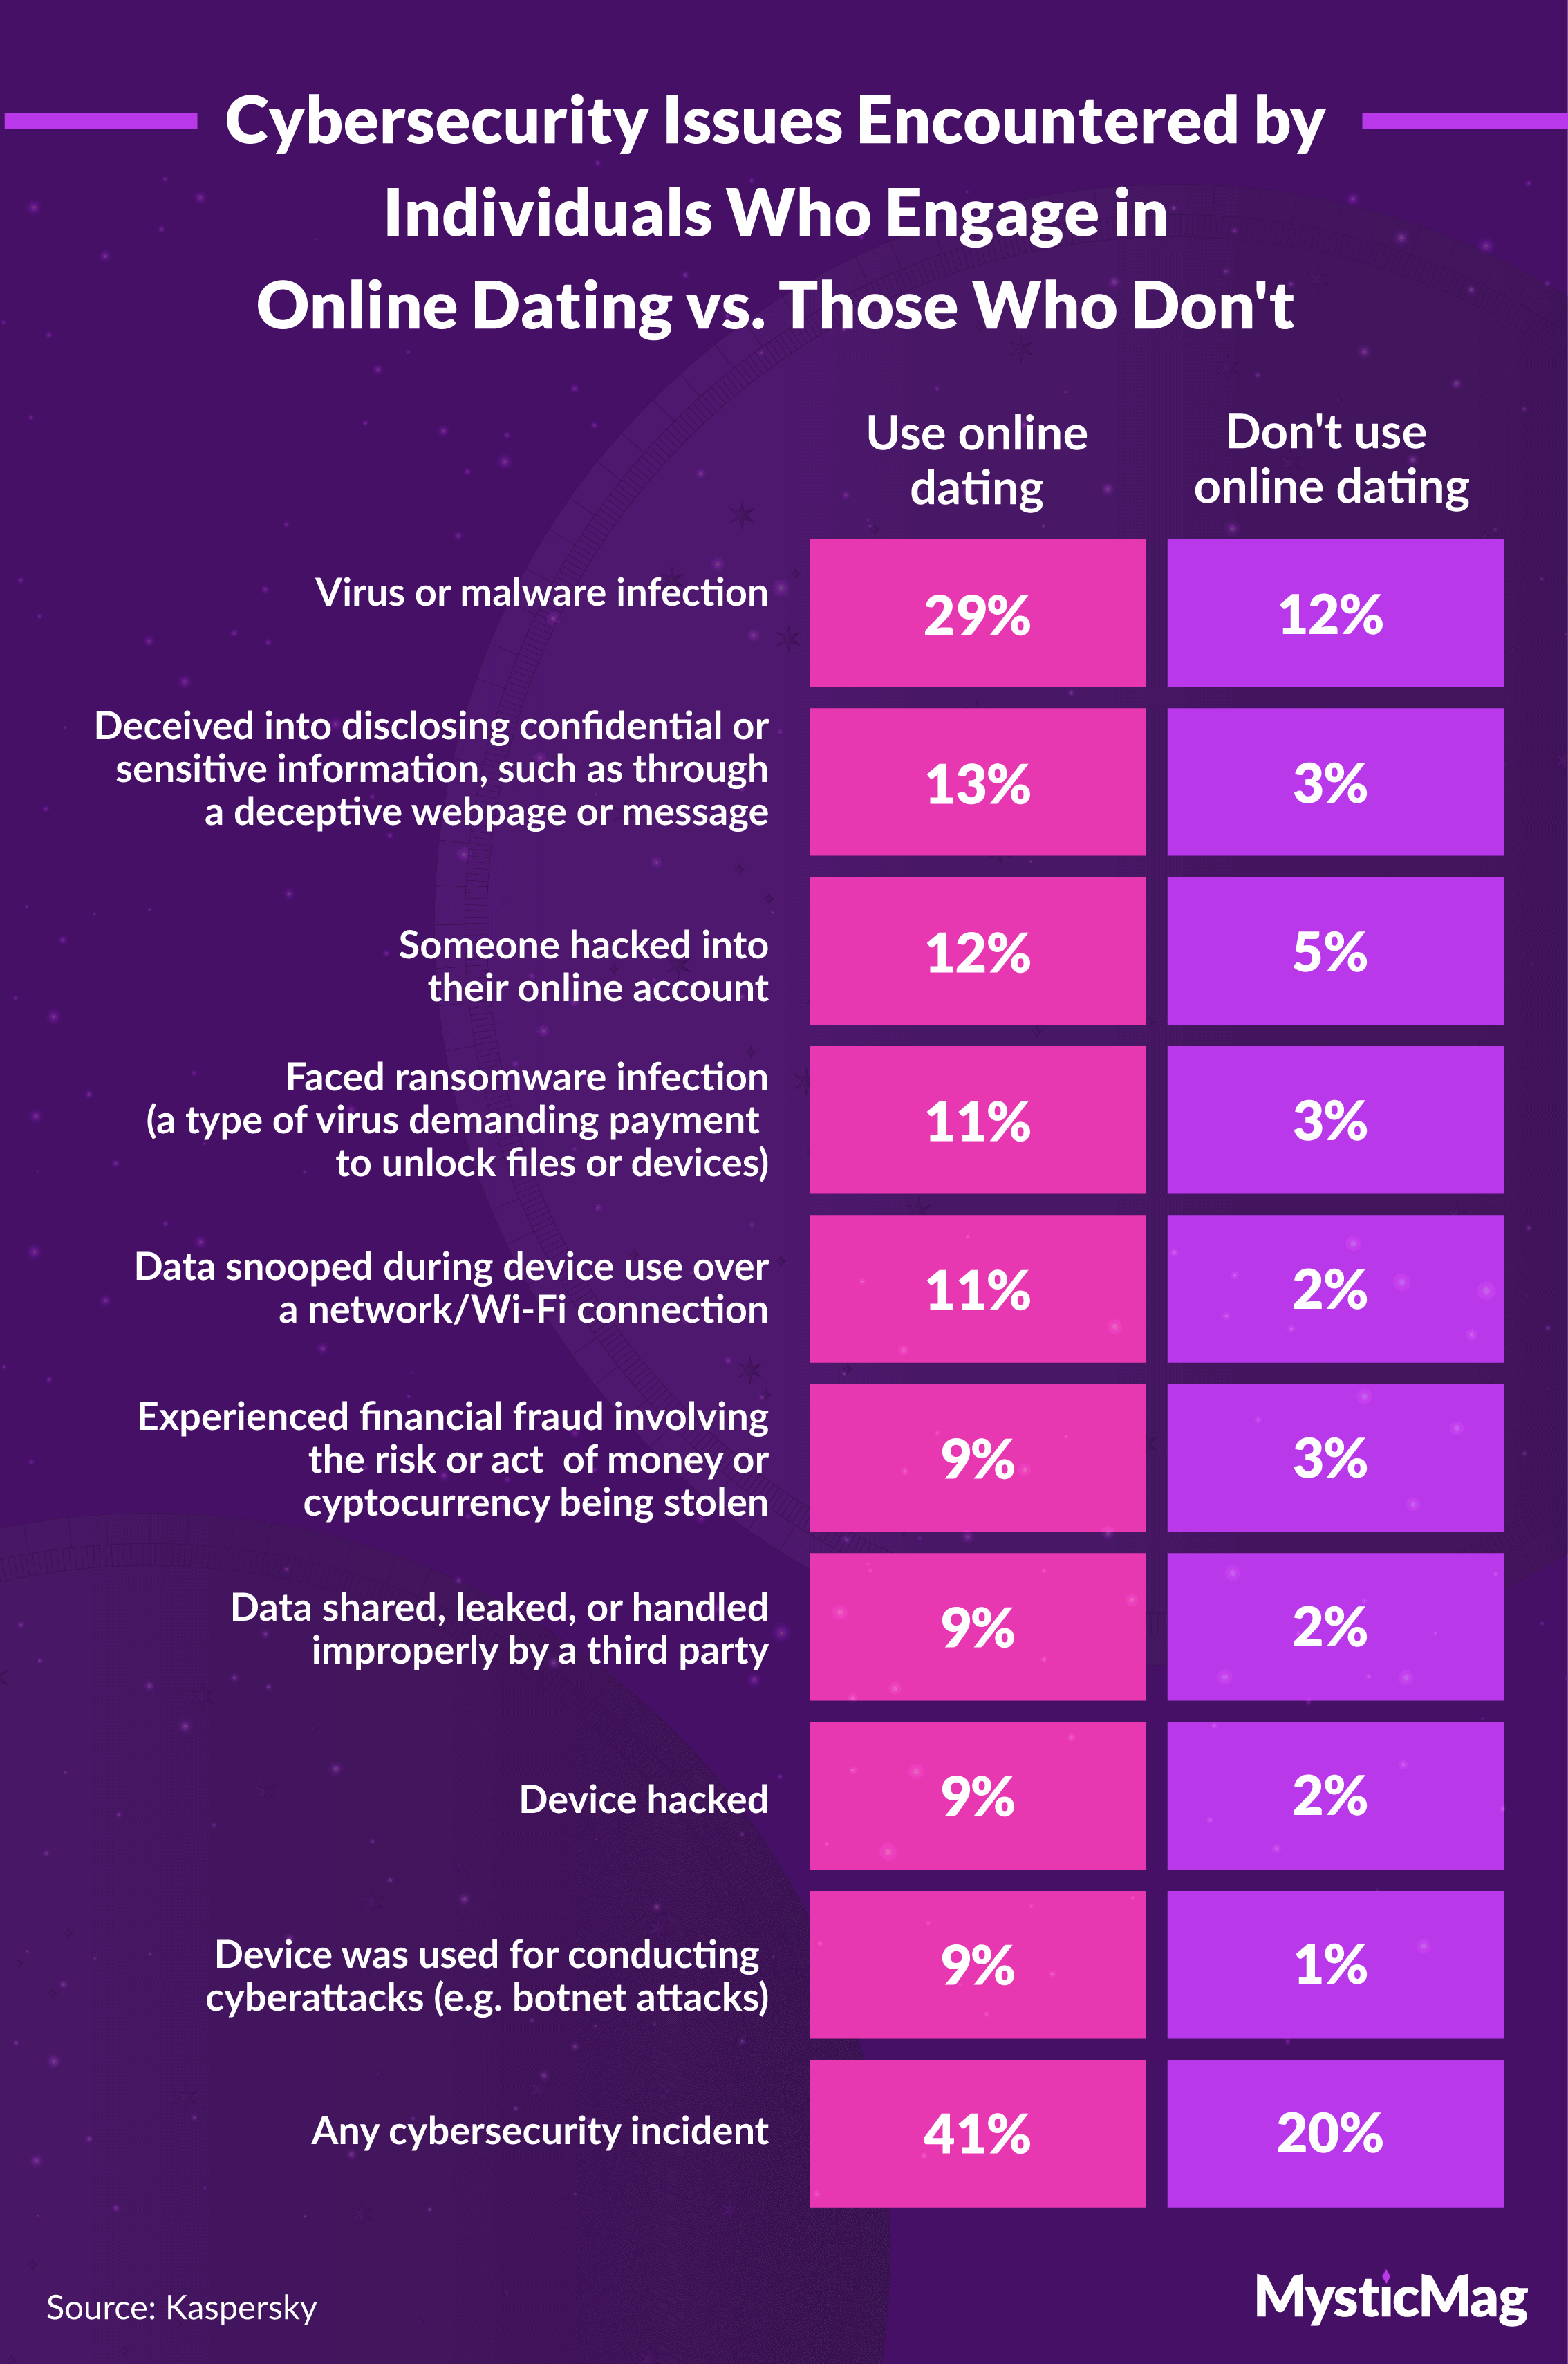 Prevalence of various cybersecurity issues among online daters vs. those who don't use online dating